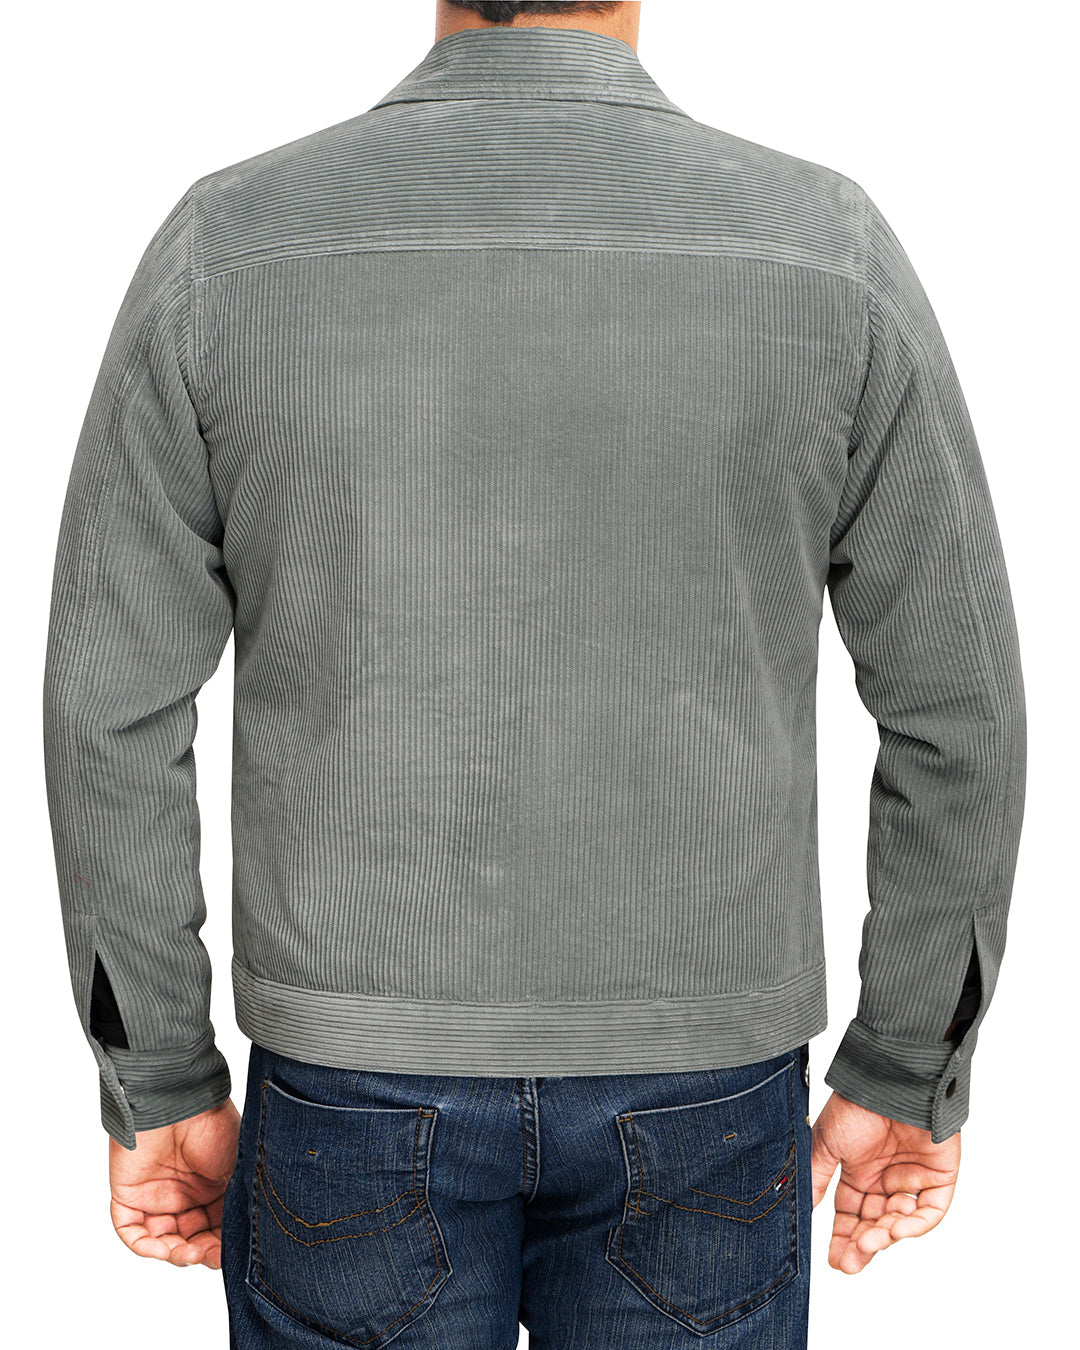 Back of model wearing the corduroy shirt jacket for men by Luxire in duck egg